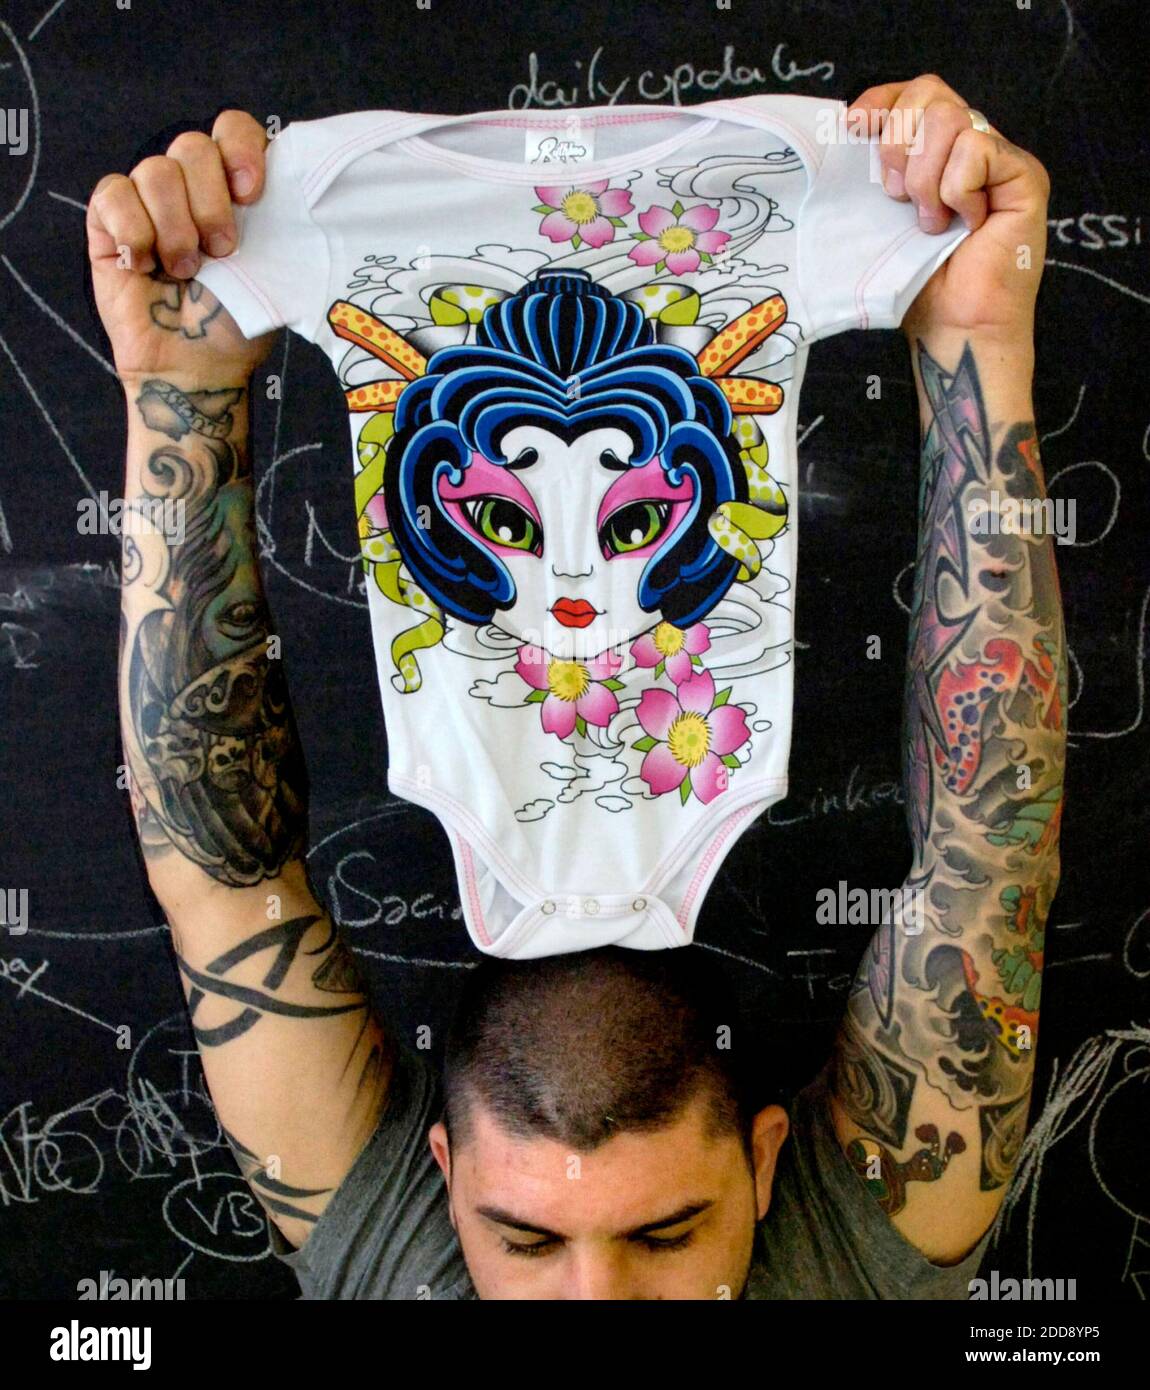 NO FILM, NO VIDEO, NO TV, NO DOCUMENTARY - Artists from the Love Hate Tattoo studio, best known from their star turn on 'Miami Ink' have designed onesies for babies. The artists are, from the front clockwise are Yoji Harada, Darren Brass, Miguel Paredes aka Mike Walls, James Hamilton, and Chris Garver, behind Yogi on right. Miami, FL, USA, February 25, 2009Photo by Marice Cohn Band/Miami Herald/MCT/ABACAPRESS.COM Stock Photo